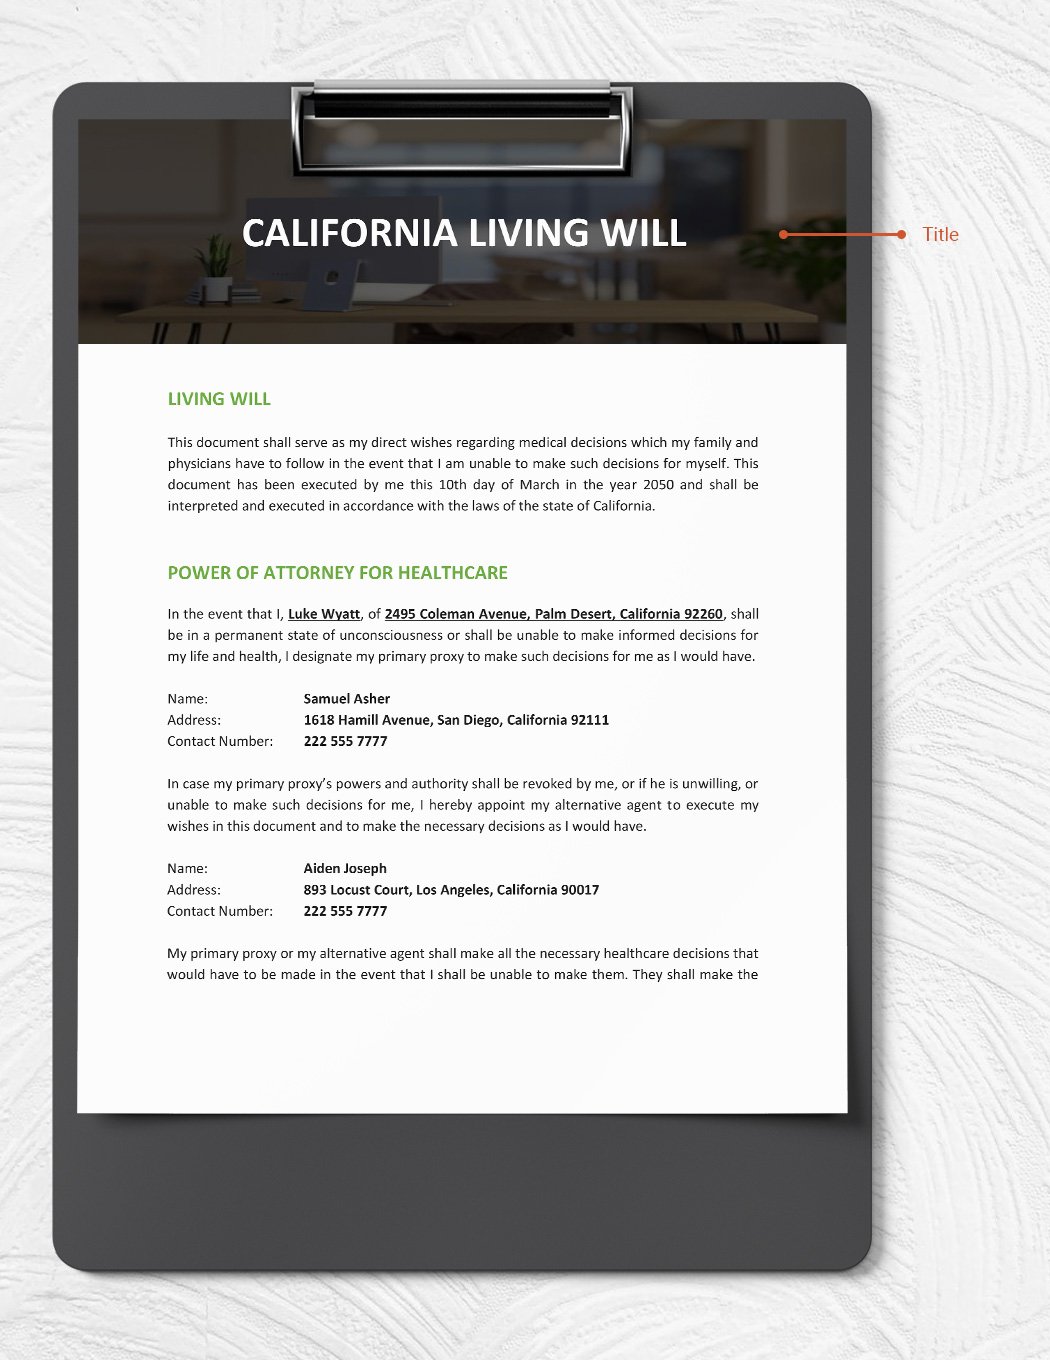 California Living Will Template Download in Word, Google Docs